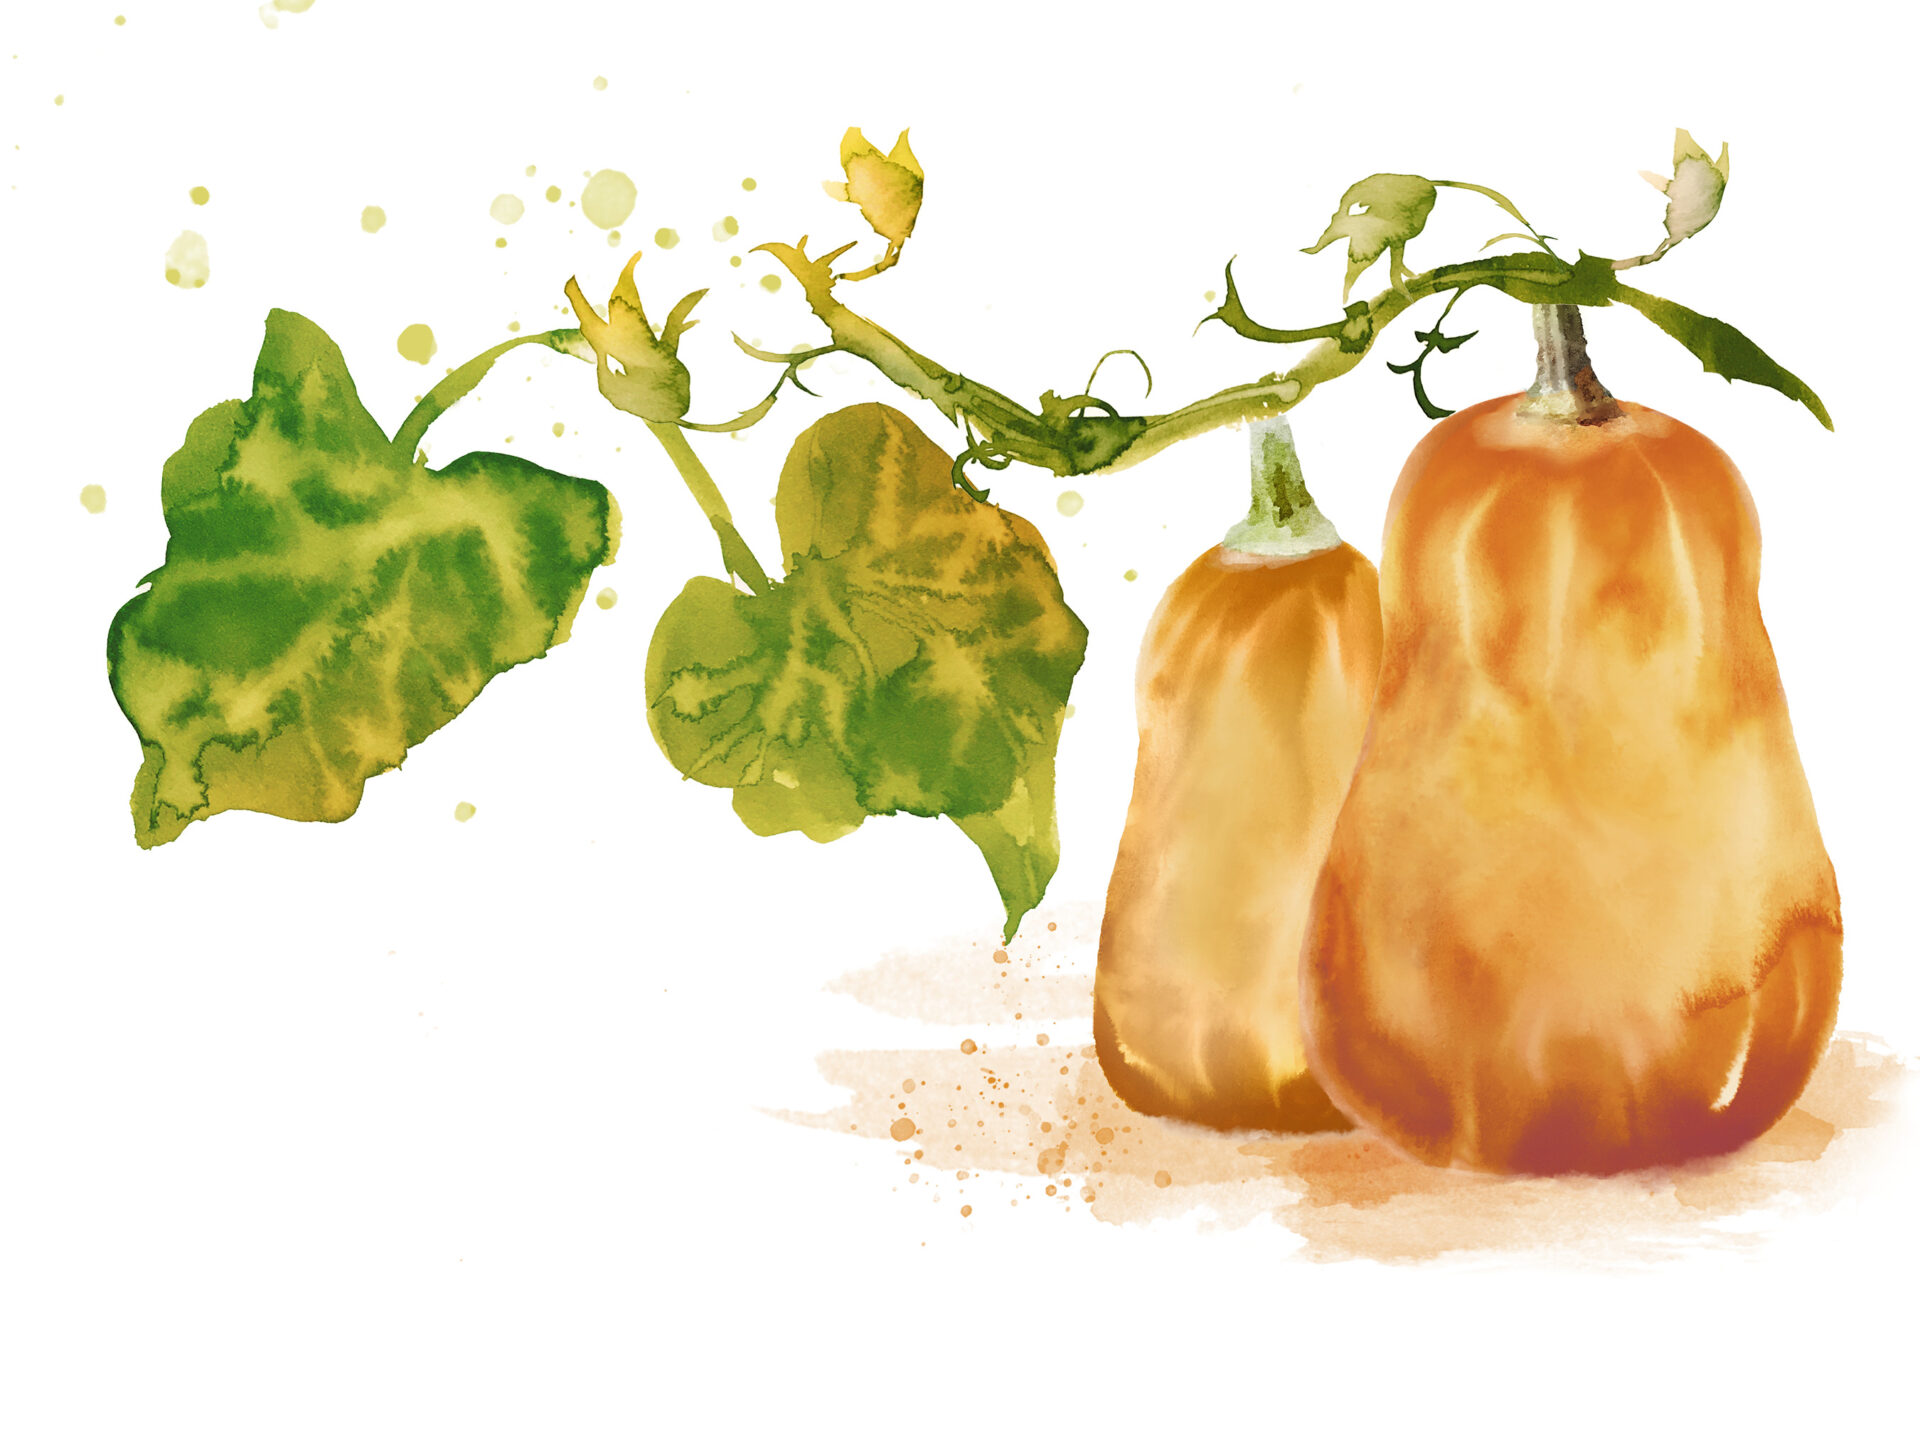 Watercolor ilustration of 2 honey nut squashes